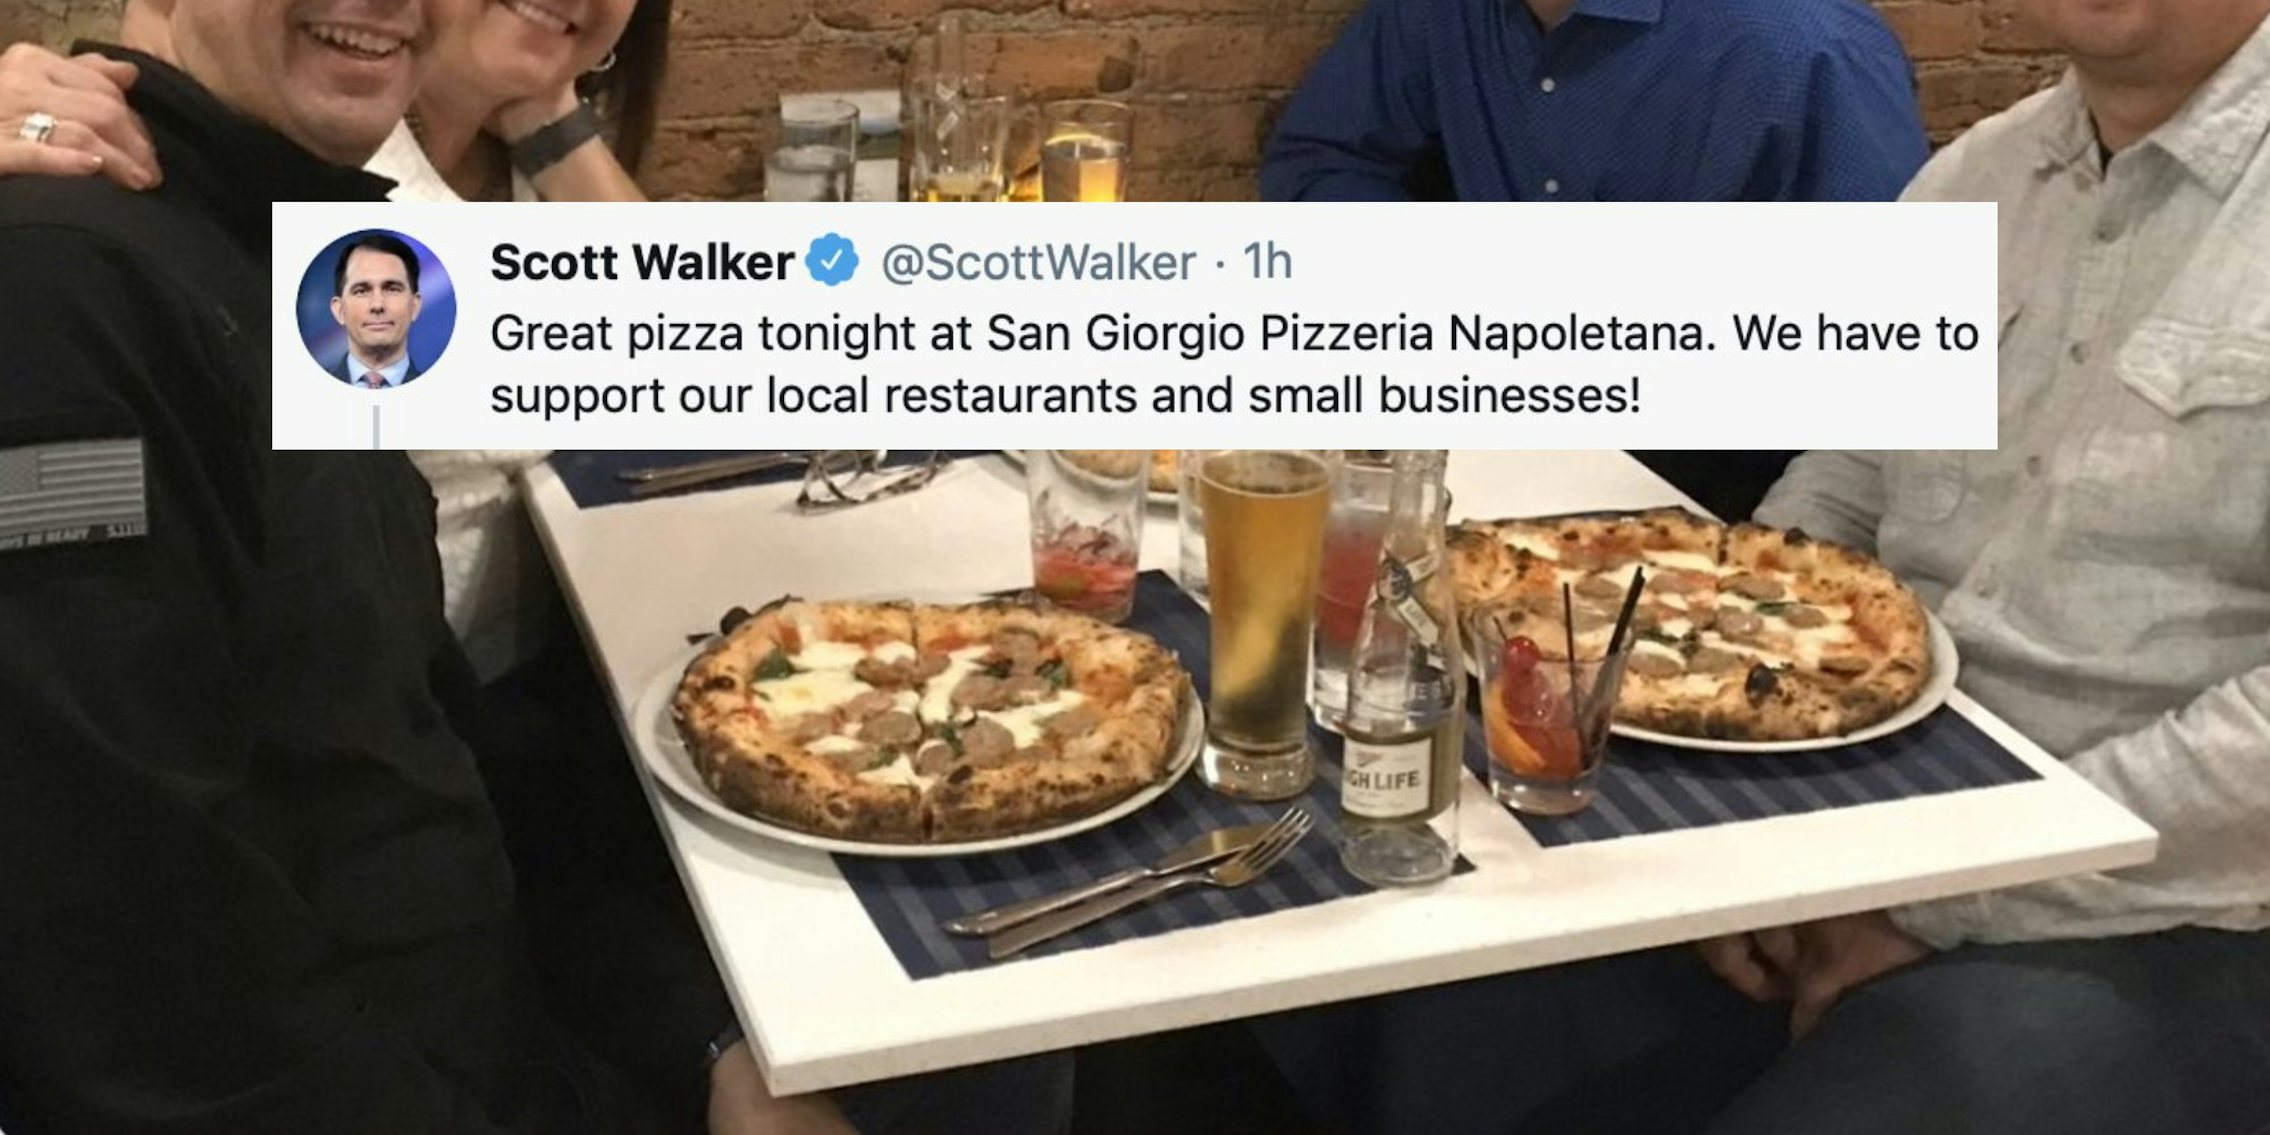 A tweet over a picture of a Pizza dinner